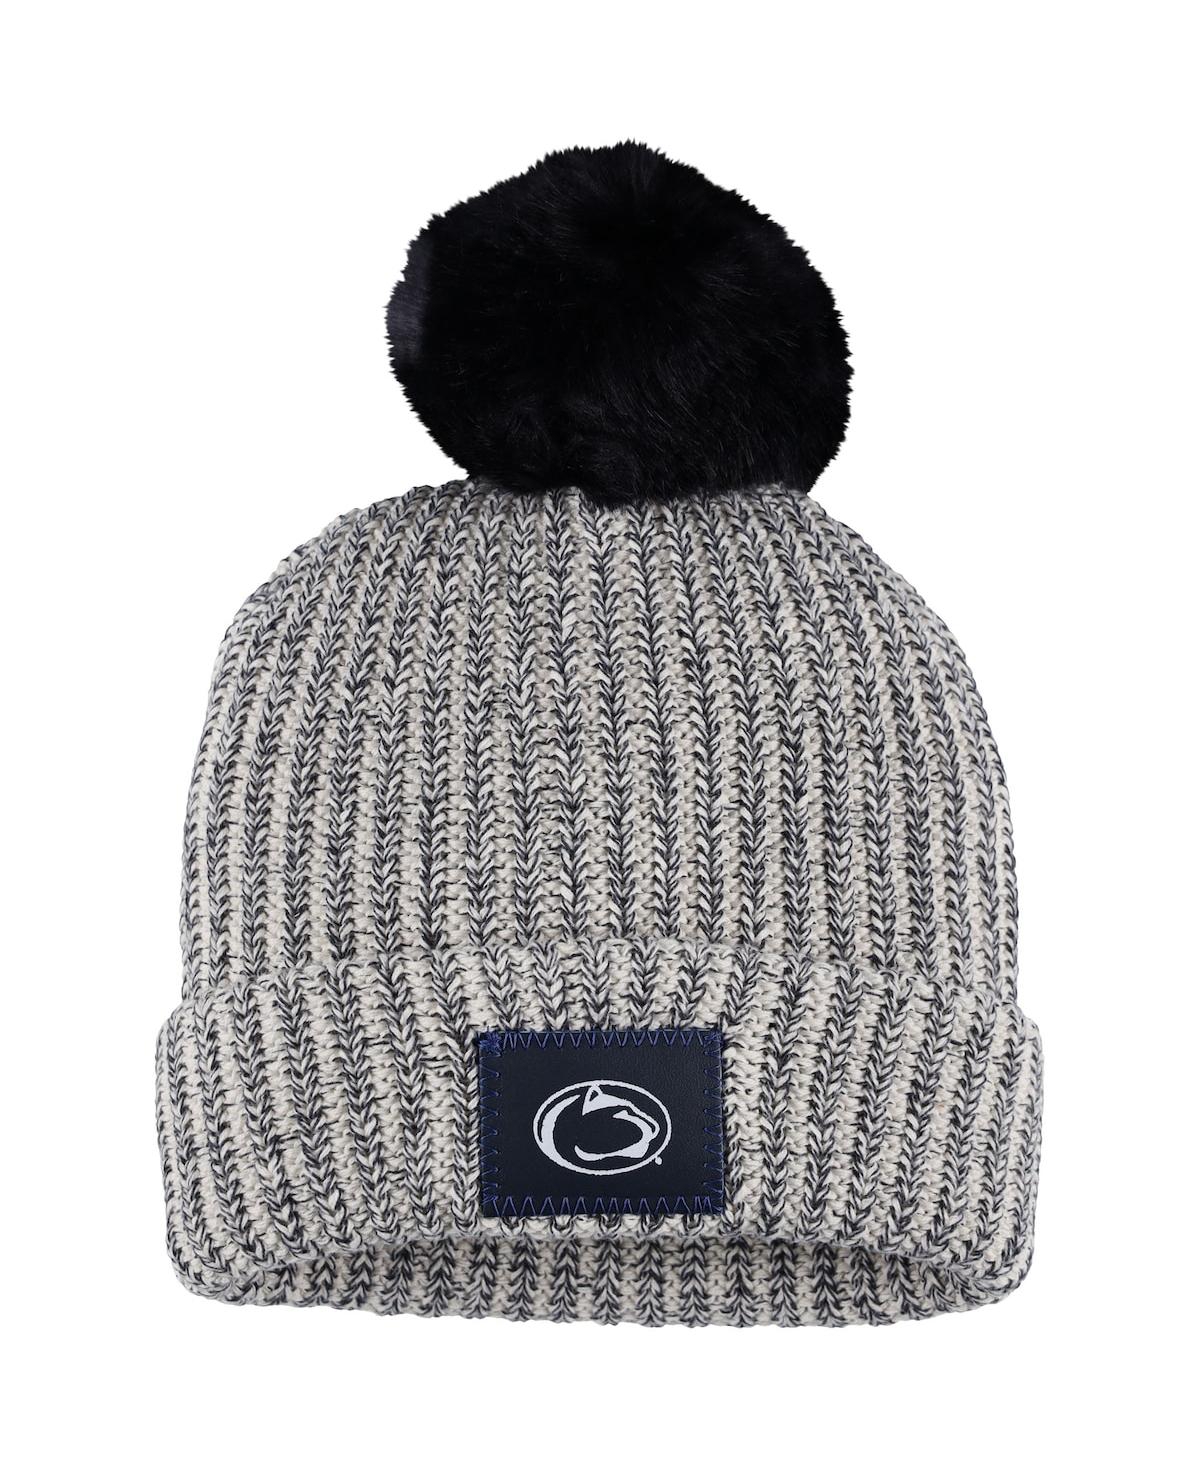 Women's Love Your Melon Gray Penn State Nittany Lions Cuffed Knit Hat with Pom - Gray